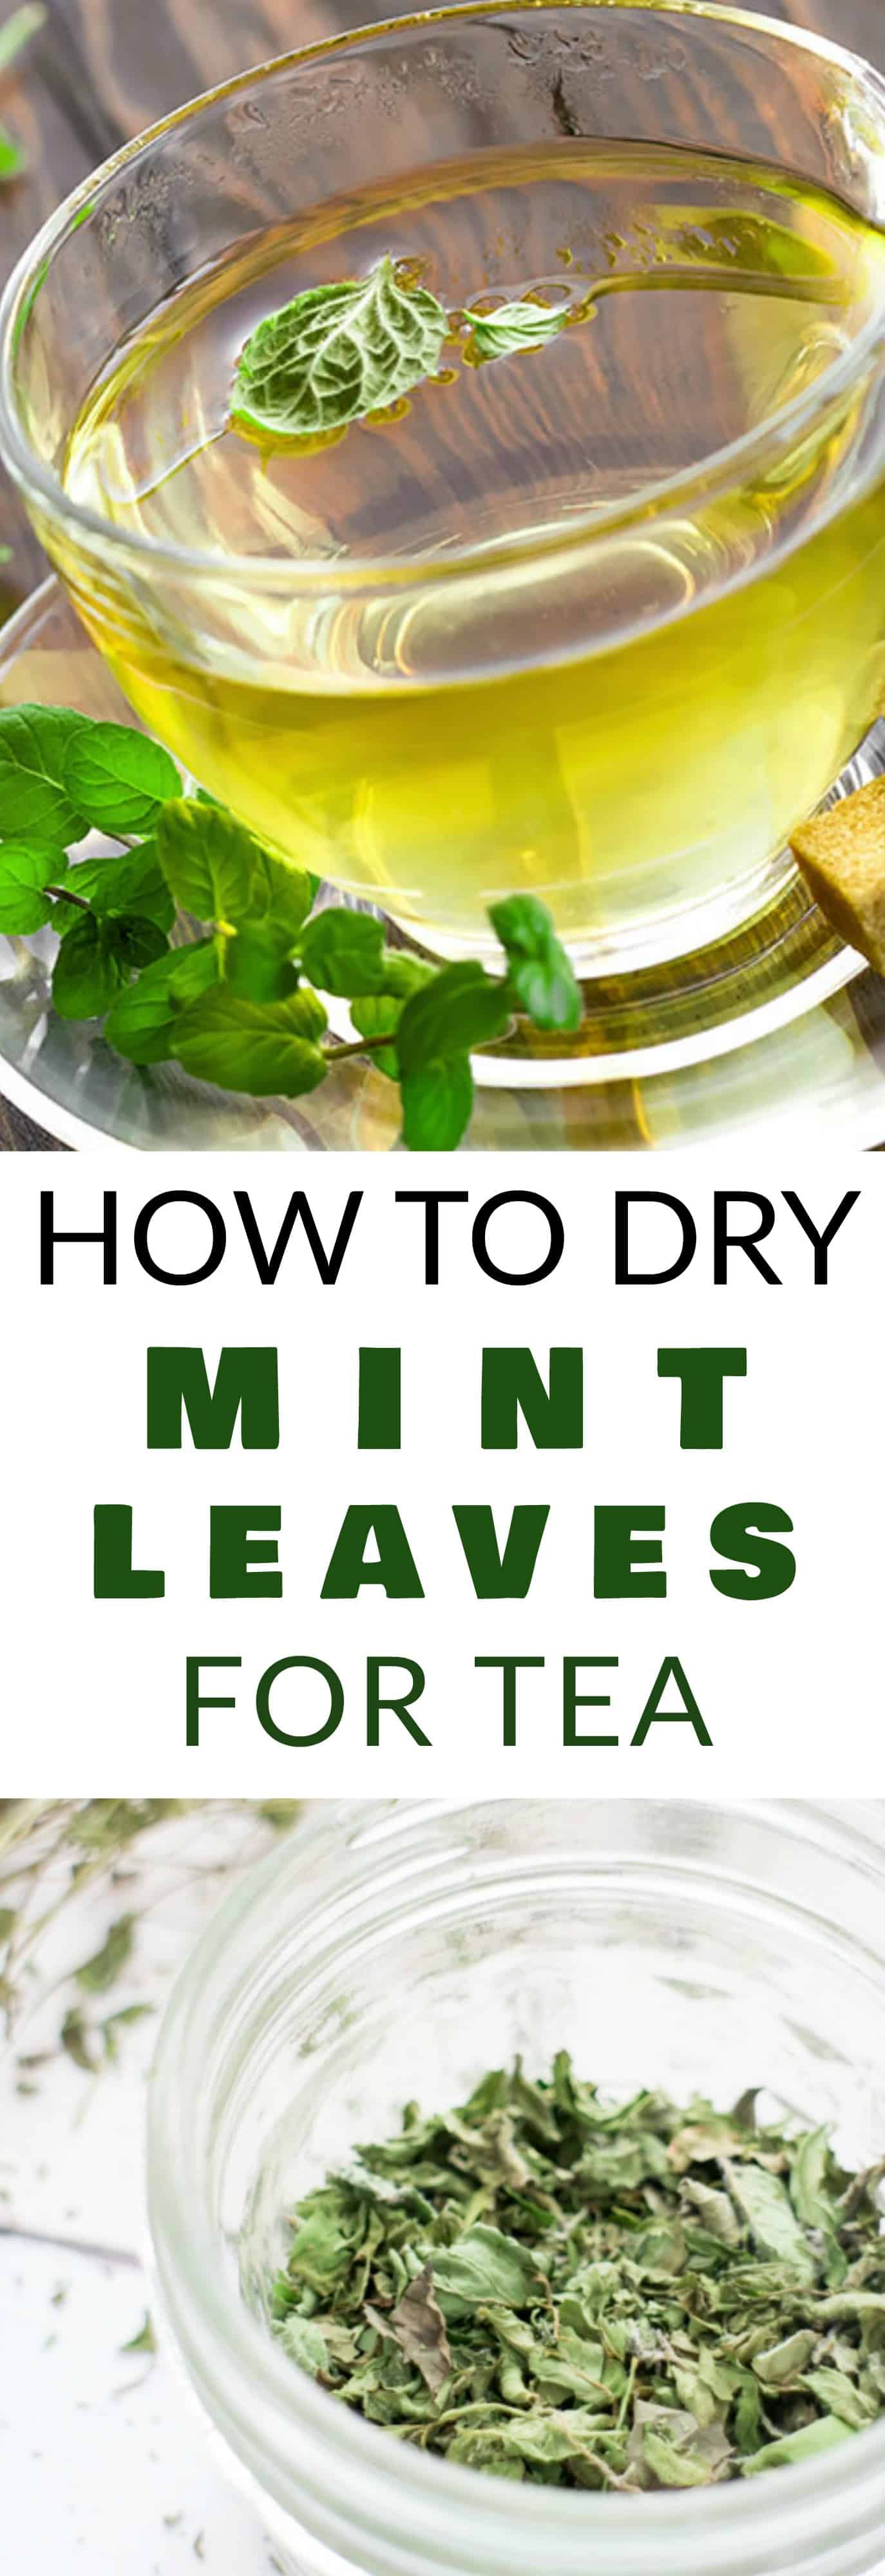 DIRECTIONS on How to Dry Mint Leaves for Mint Tea! These DIY How to Make Mint Tea instructions shows how easy it is to dry mint leaves so you can make your own homemade mint tea. I store this dried mint tea for months so I can enjoy the health benefits year round!